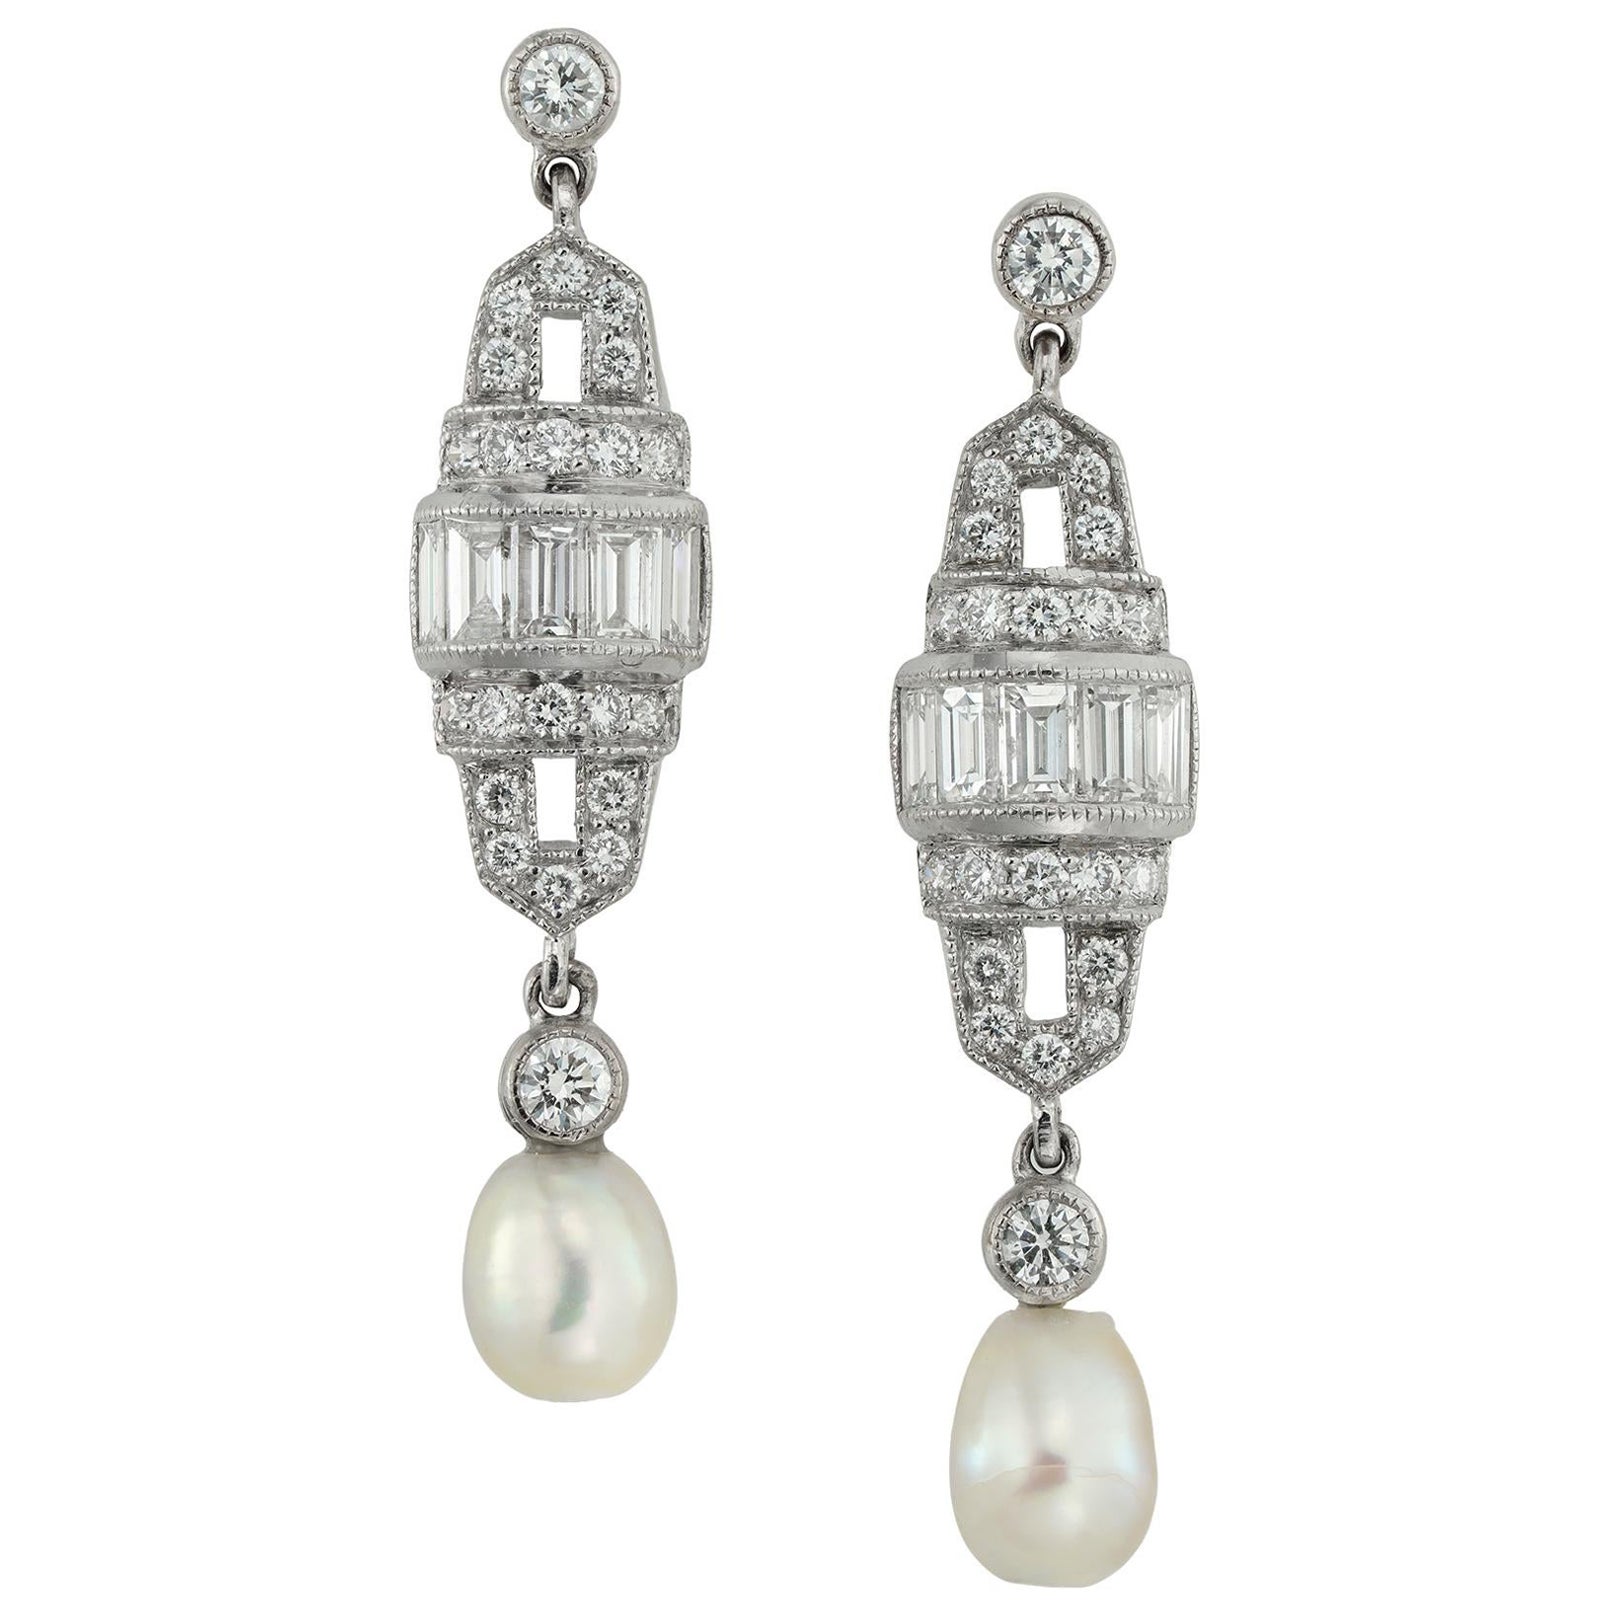 Pair of Art Deco Style Pearl and Diamond Drop Earrings